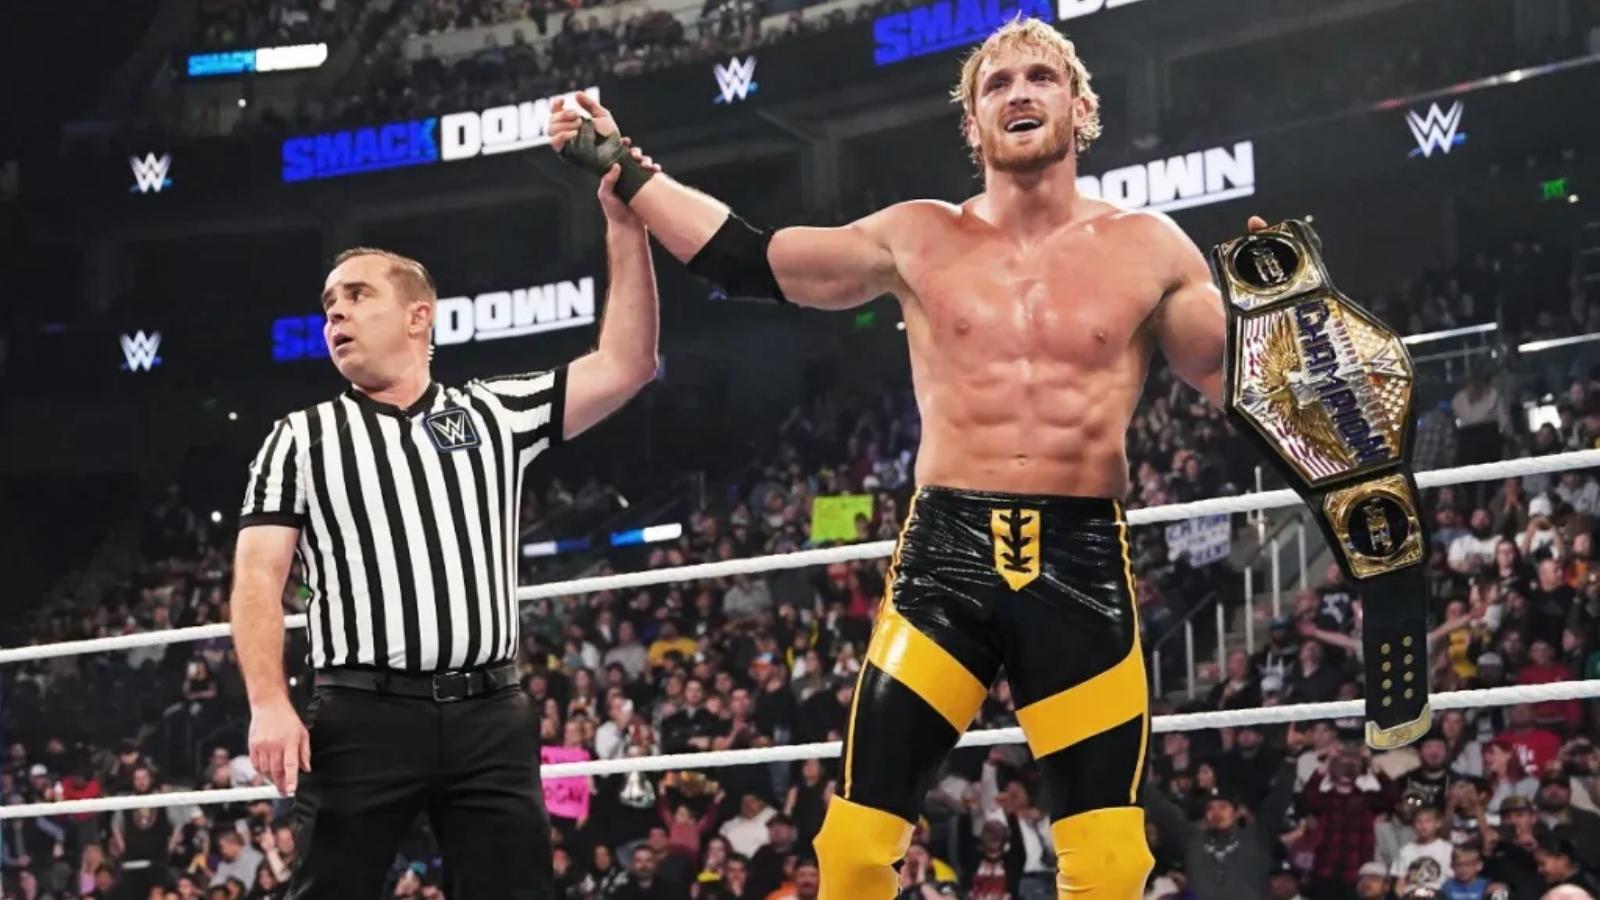 logan paul's hand raised in victory on wwe smackdown